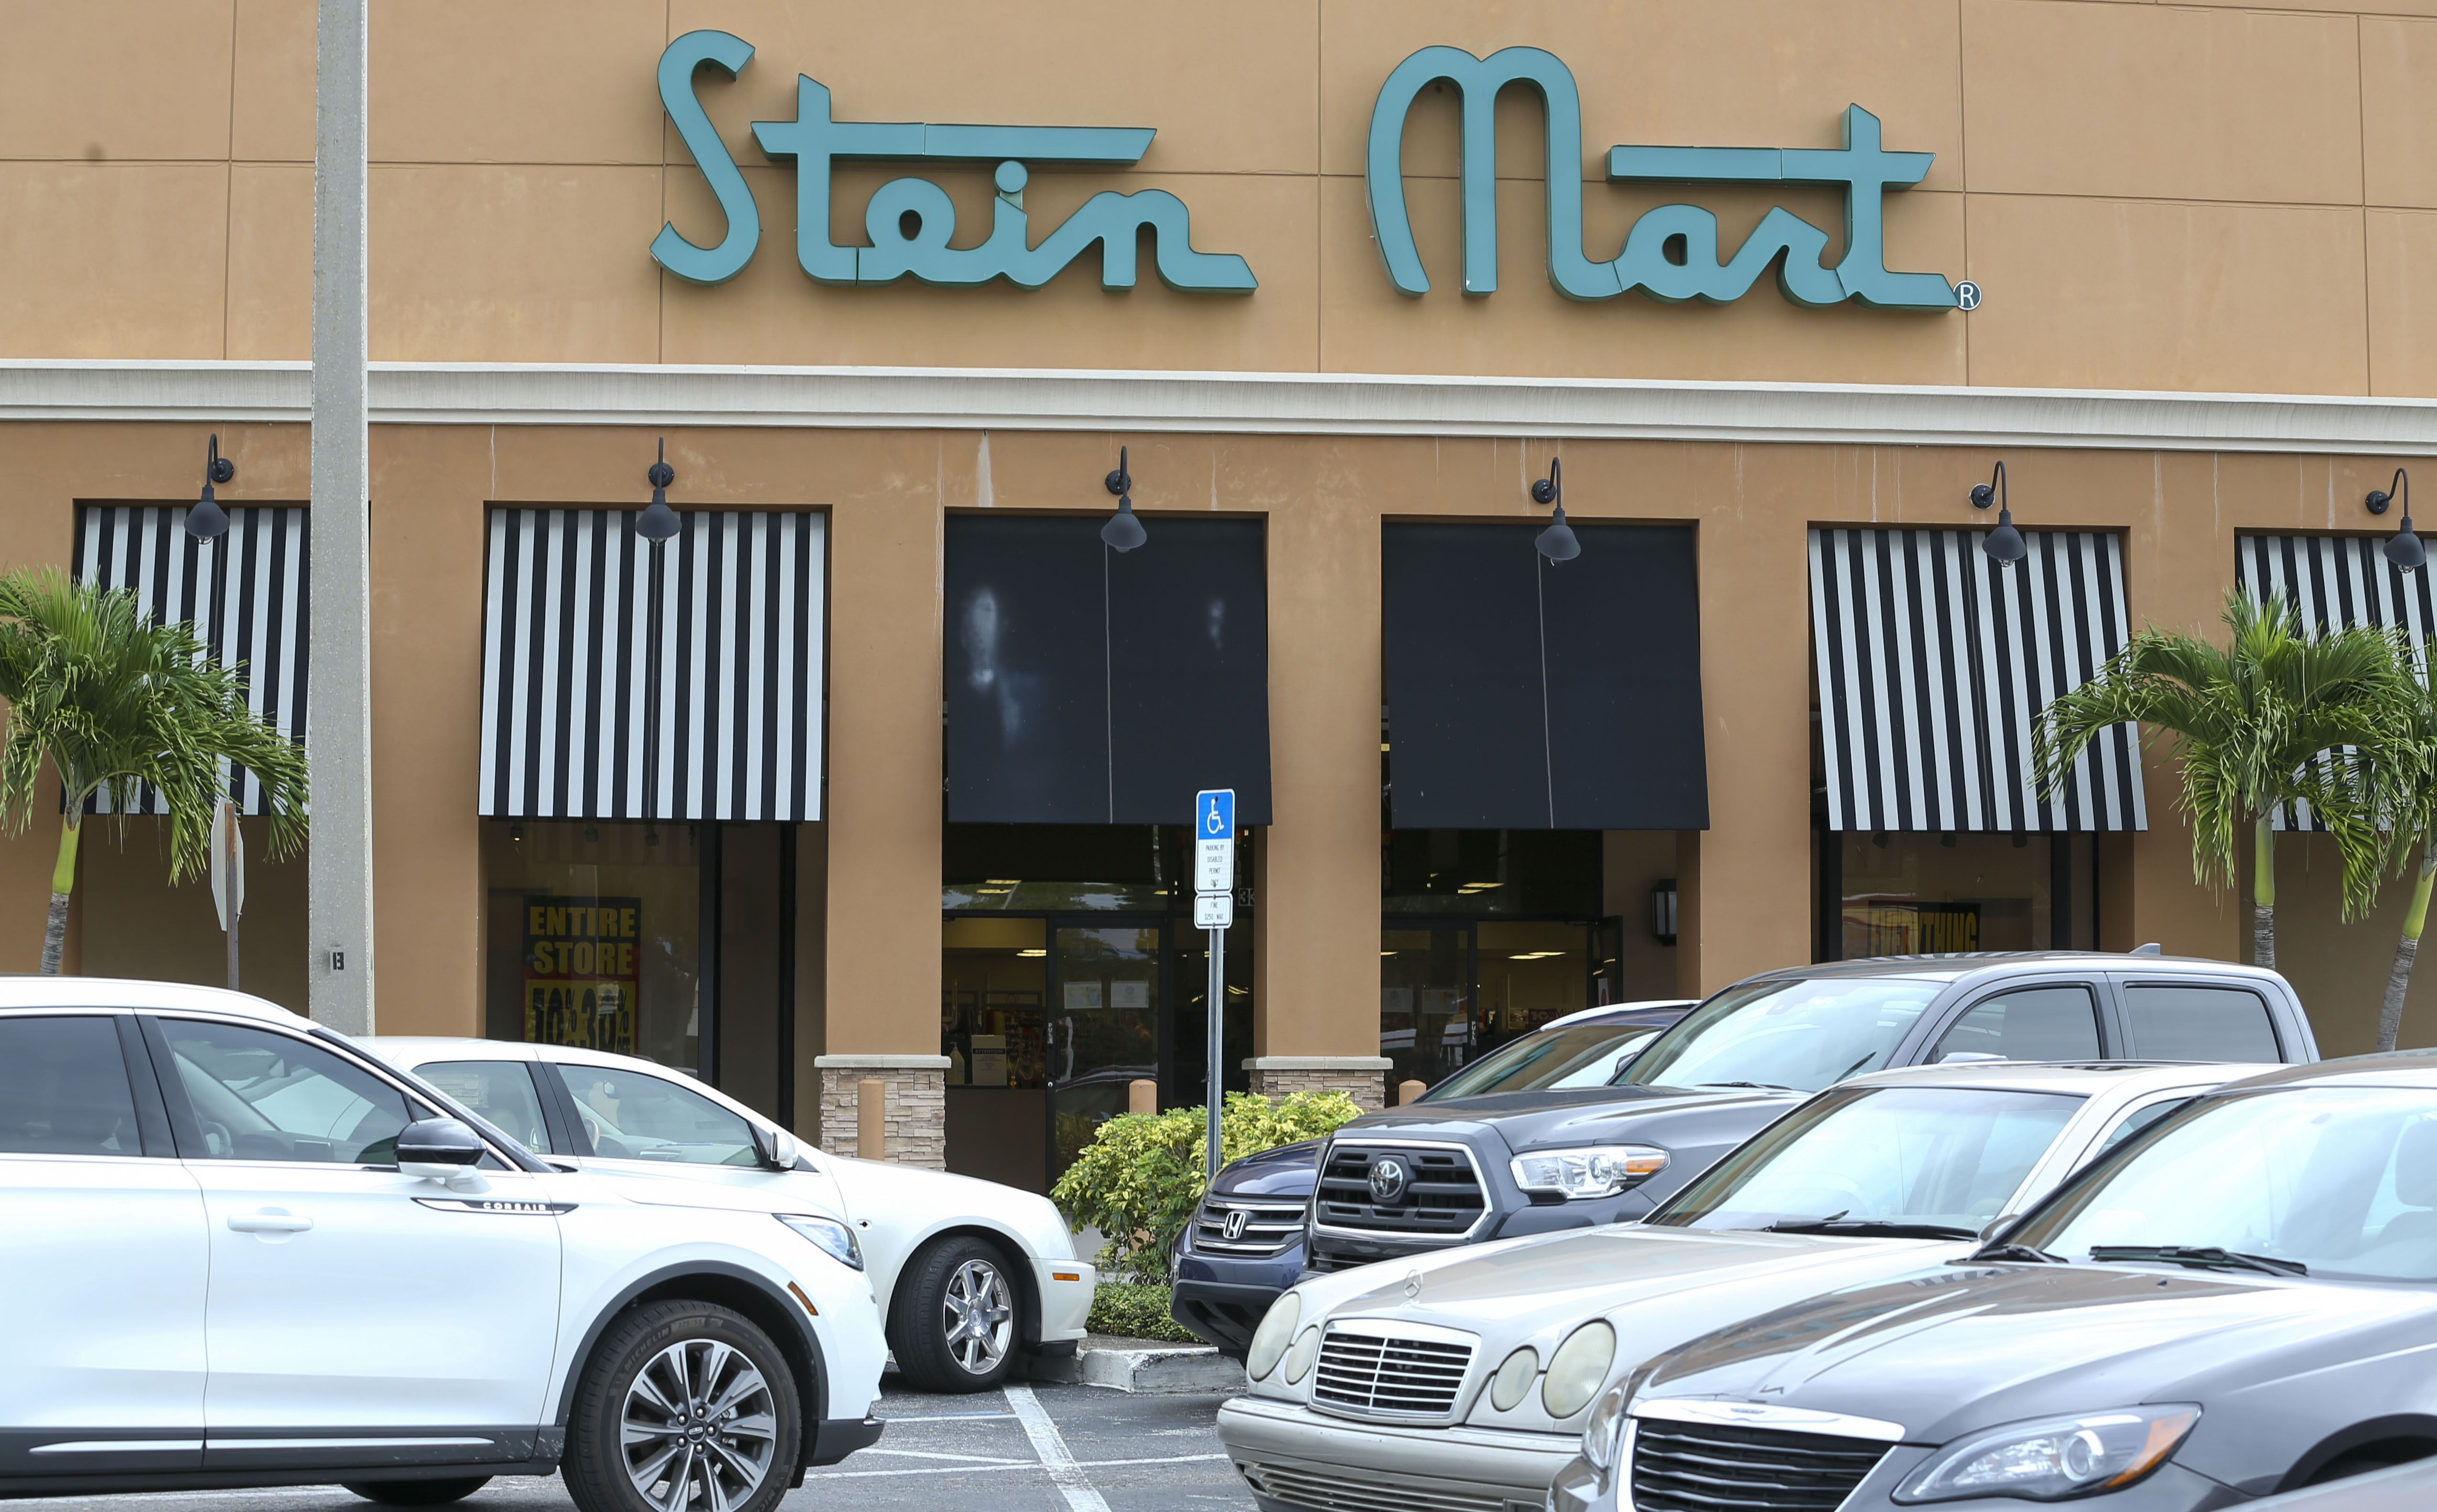 Stein Mart Files for Chapter 11 Bankruptcy